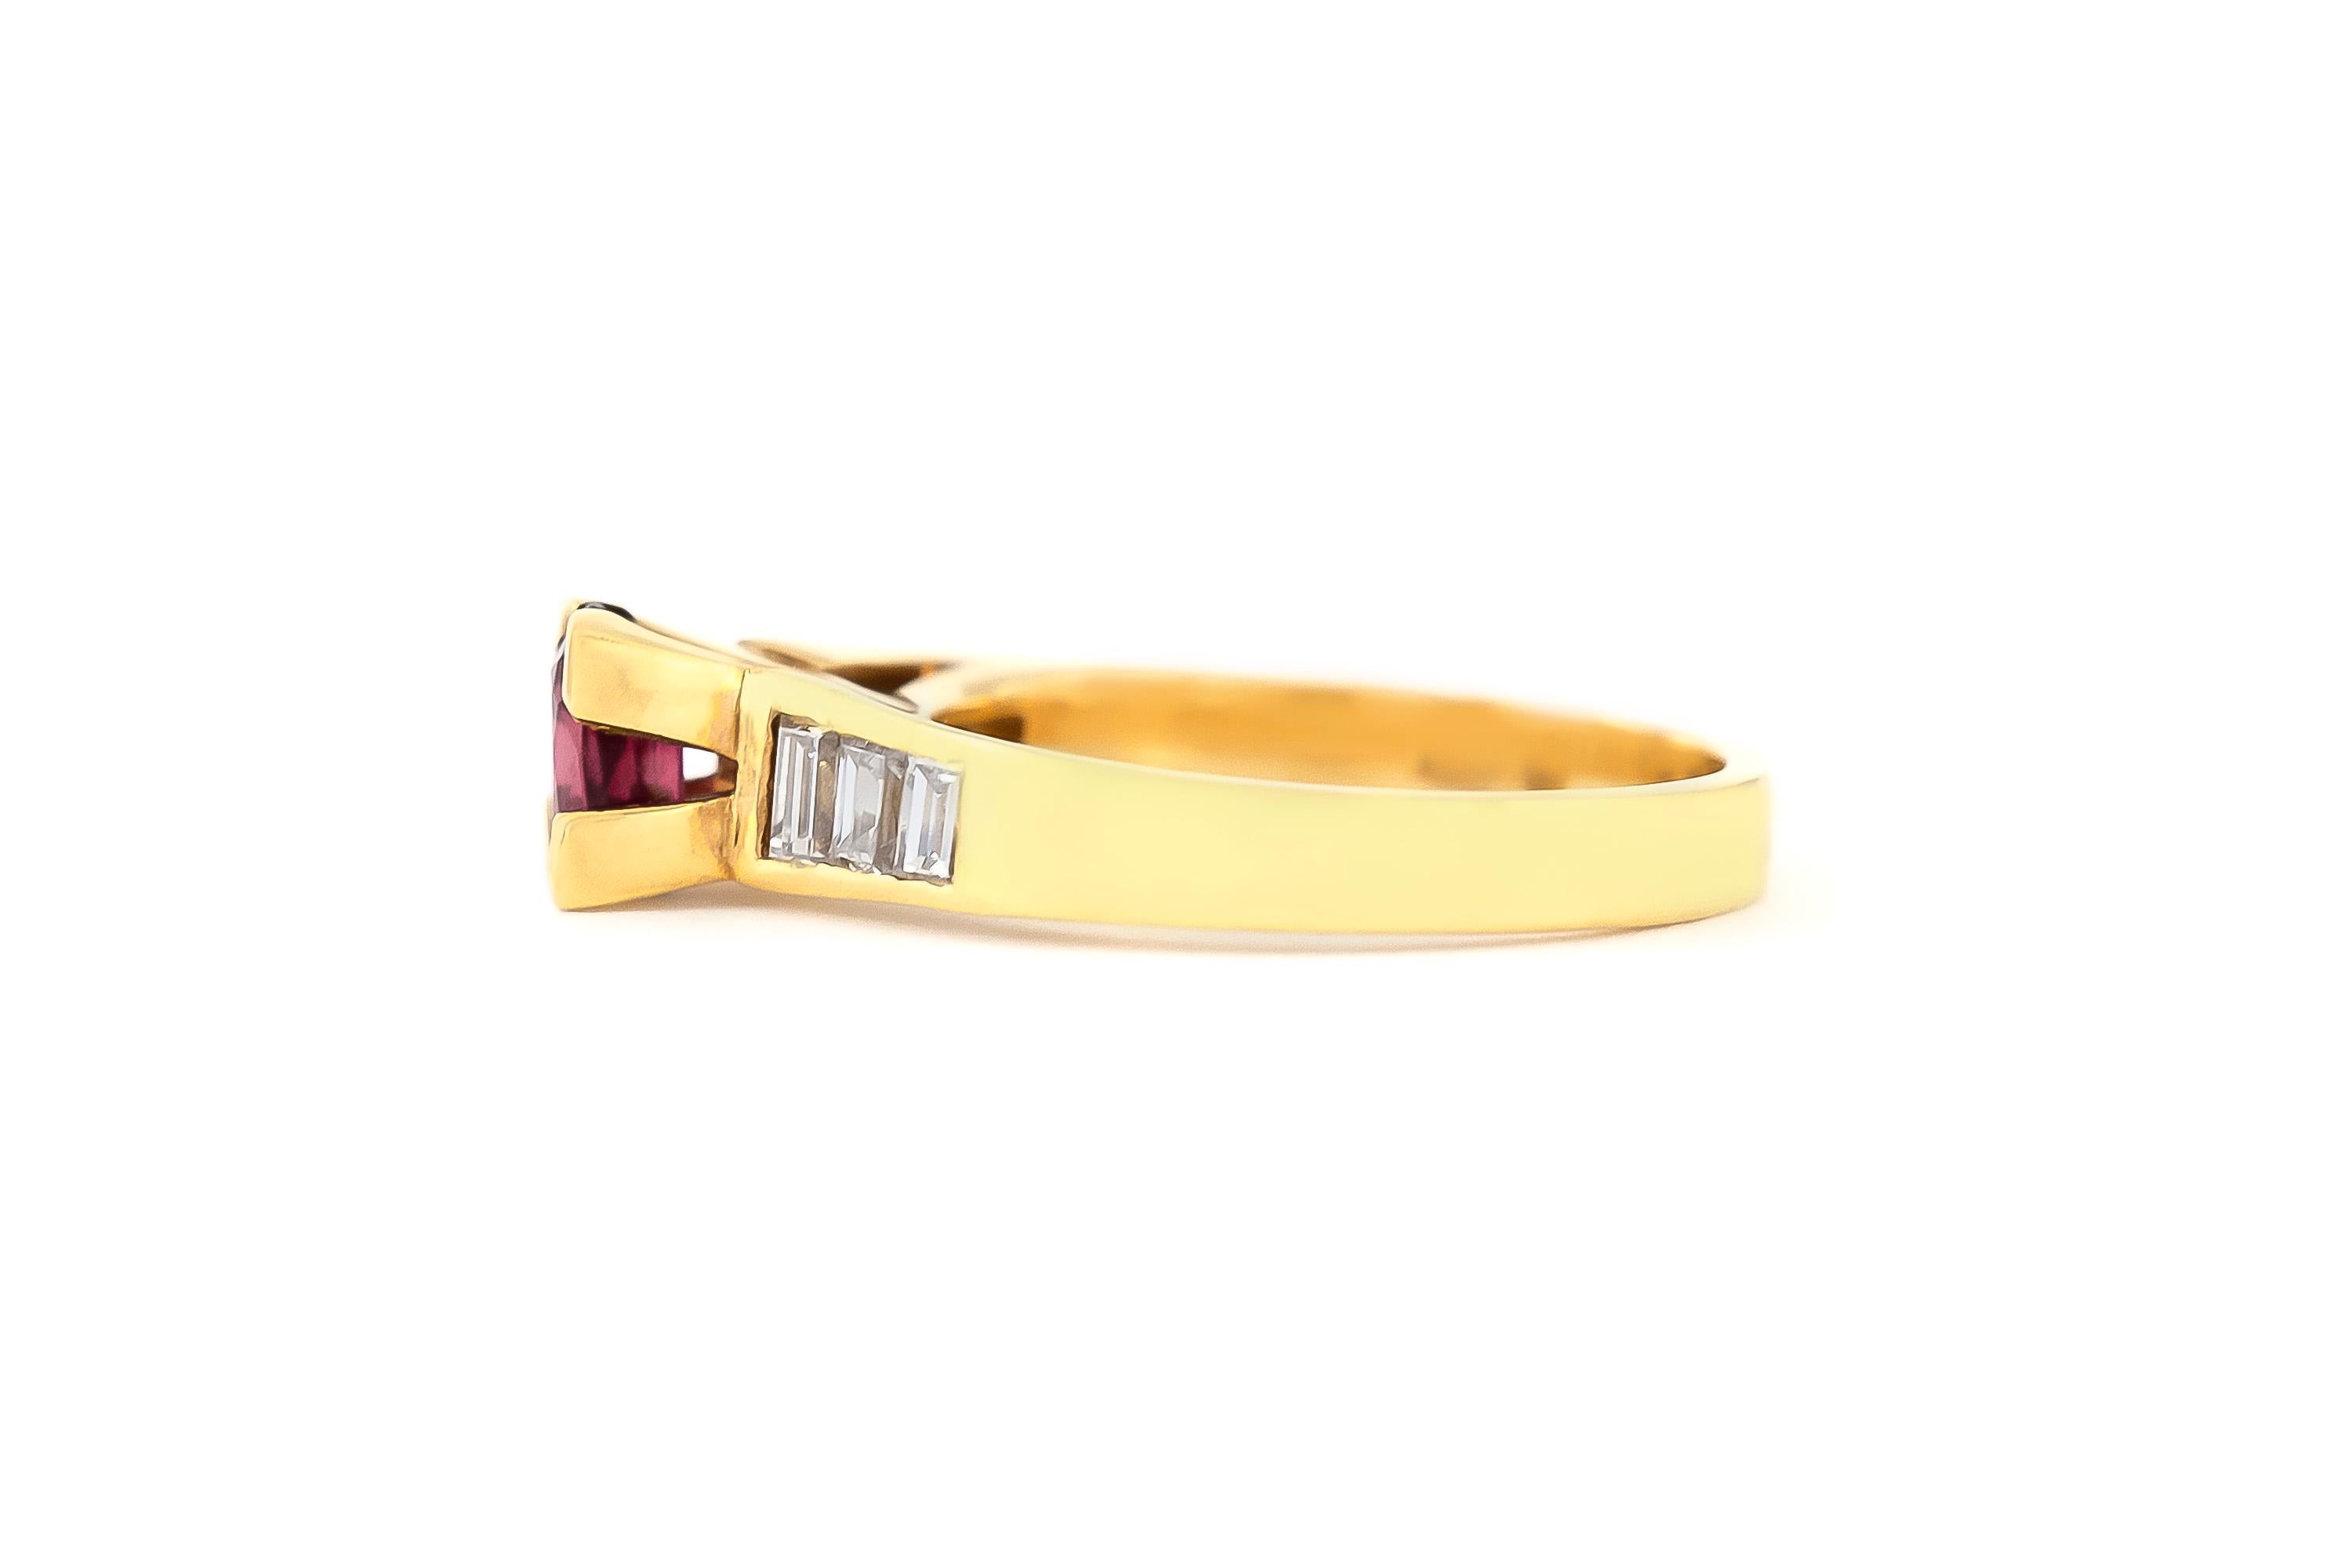 The ring is finely crafted in 18k yellow gold with center ruby weighing approximately total of 0.80 carat and diamonds weighing approximately total of 0.50 carat.
Circa 1970.